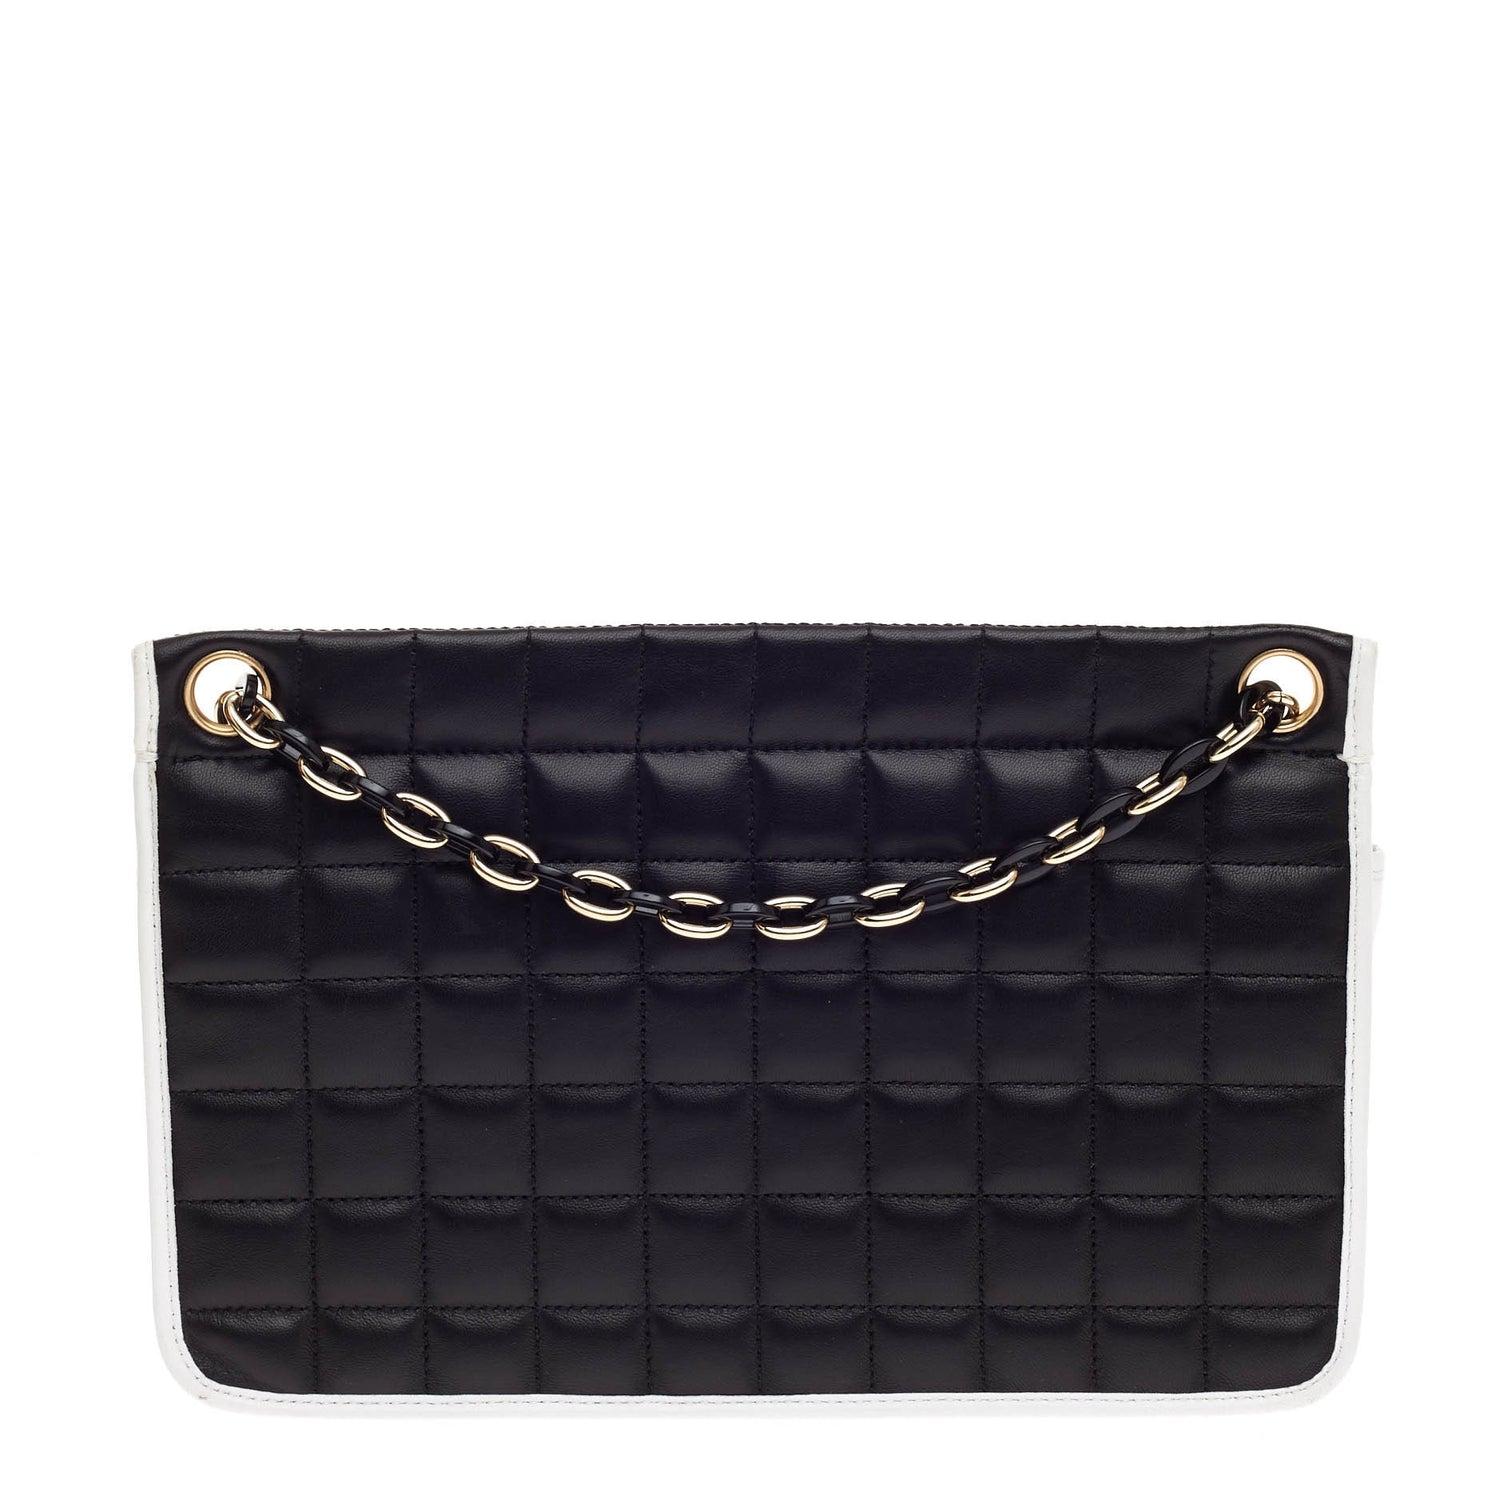 Chanel Classic Flap Two Tone Limited Edition Black & White Lambskin Leather Bag For Sale 2